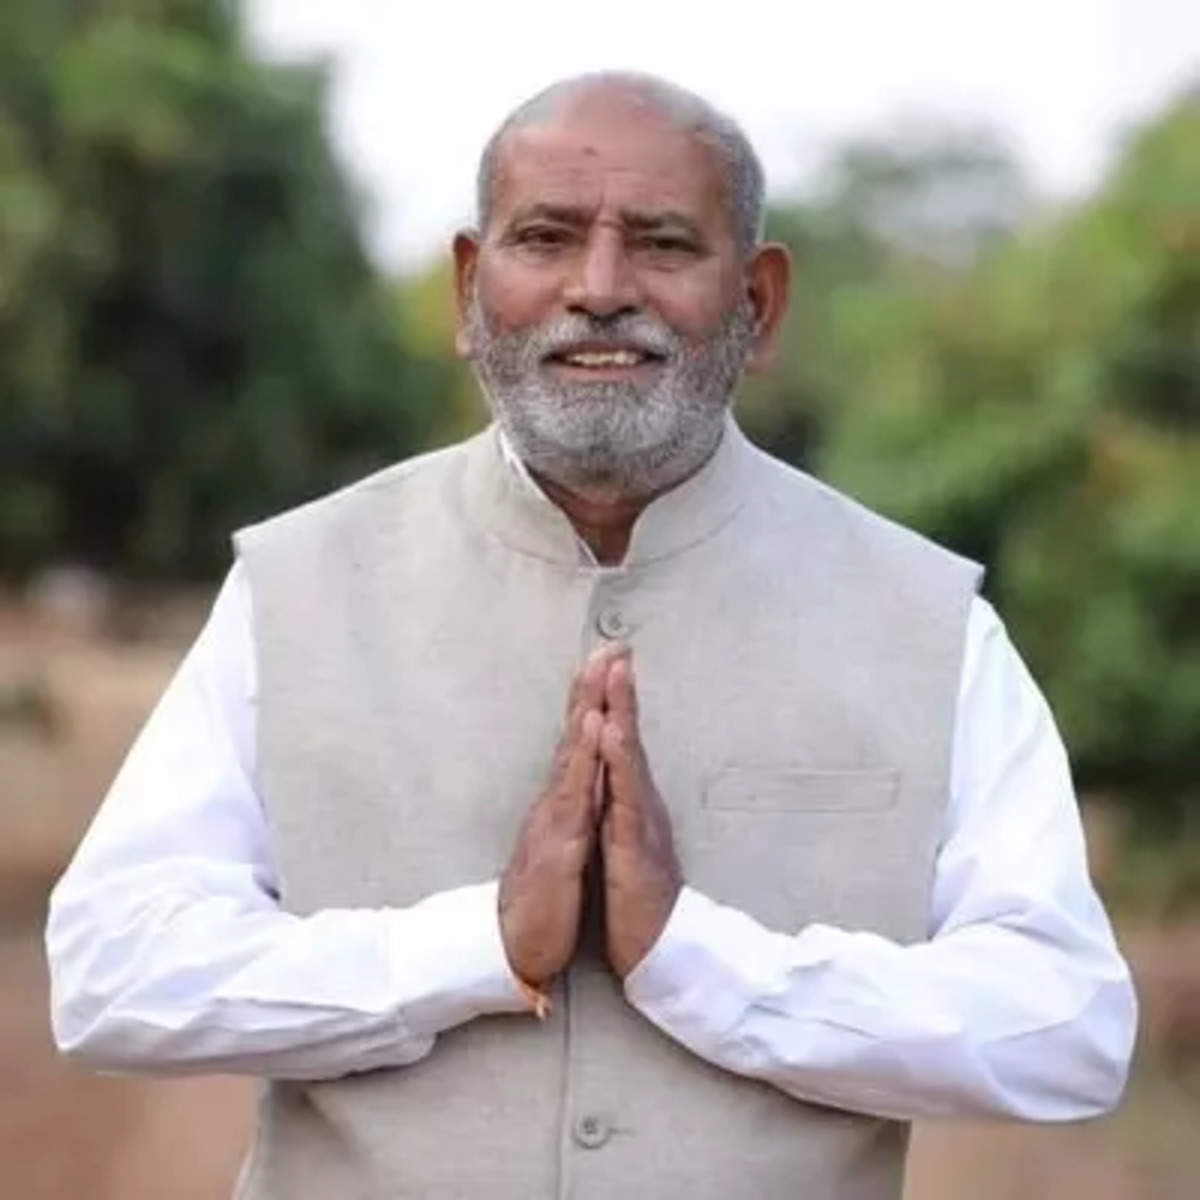 #BREAKING: SANGANNA KARADI EFFECT; SETBACK FOR THE BJP in #Koppala ahead of #LokSabhaElections2024 📌More than 50 BJP activists Quit the BJP Party and joined Congress under the leadership of former MP Sanganna Kardi and MLA Raghavendra Hitnal in various villages of the Koppala…